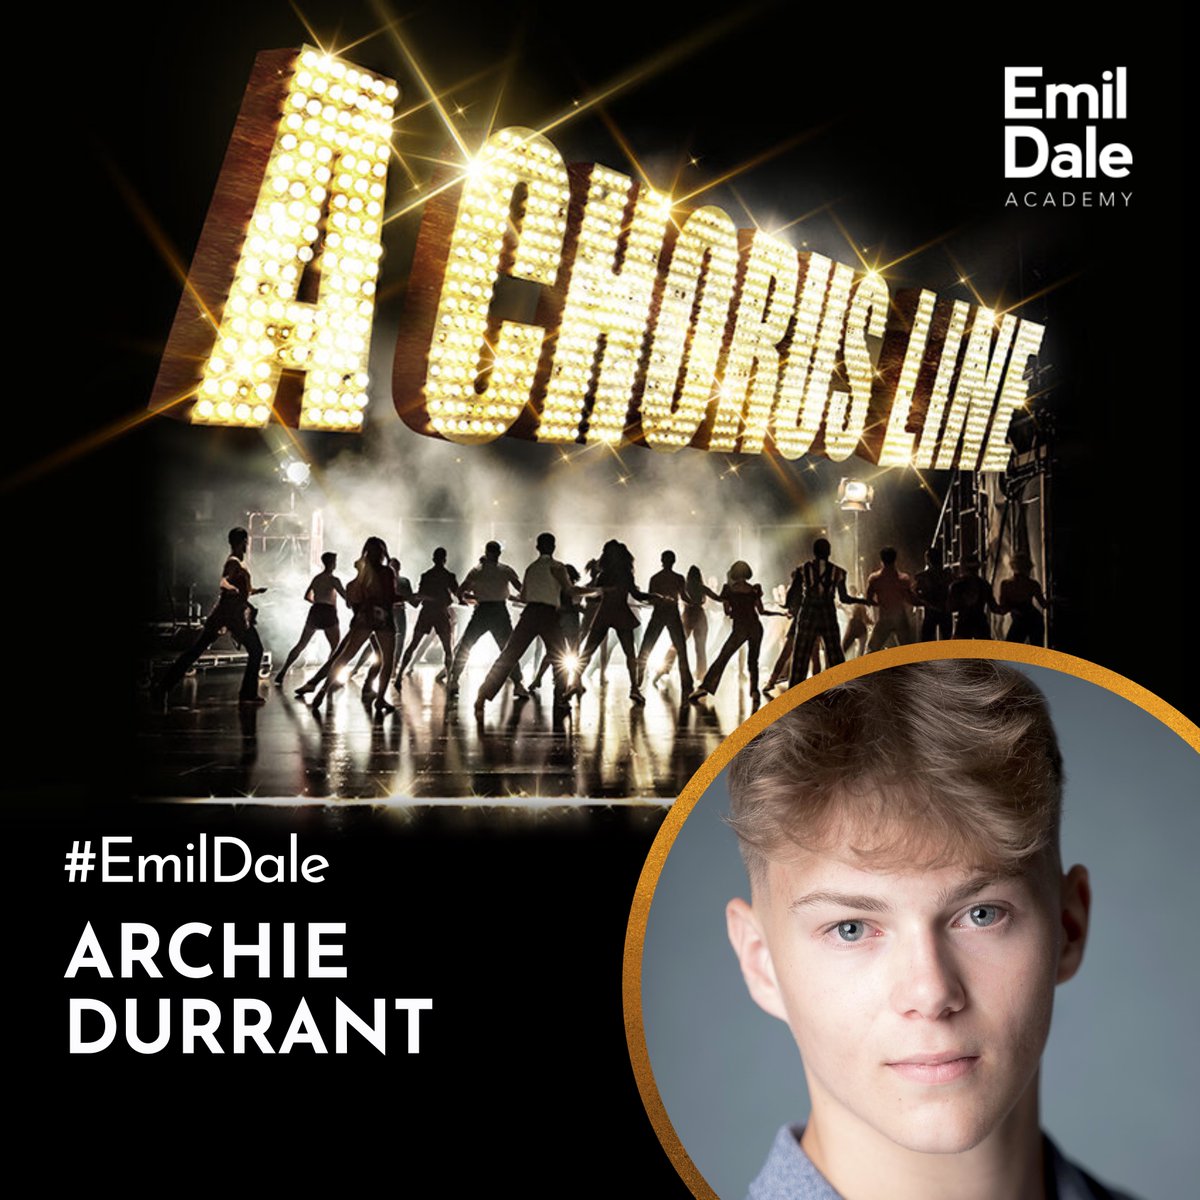 ✨ MORE GRAD NEWS! ✨ Huge congratulations to Emil Dale Part-Time graduate Archie Durrant who has been cast as Mark Anthony in the A Chorus Line revival, heading to The Curve and Sadler’s Wells before embarking on a UK tour!💫 We were already proud of you ⭐️ #theatre #emildale…